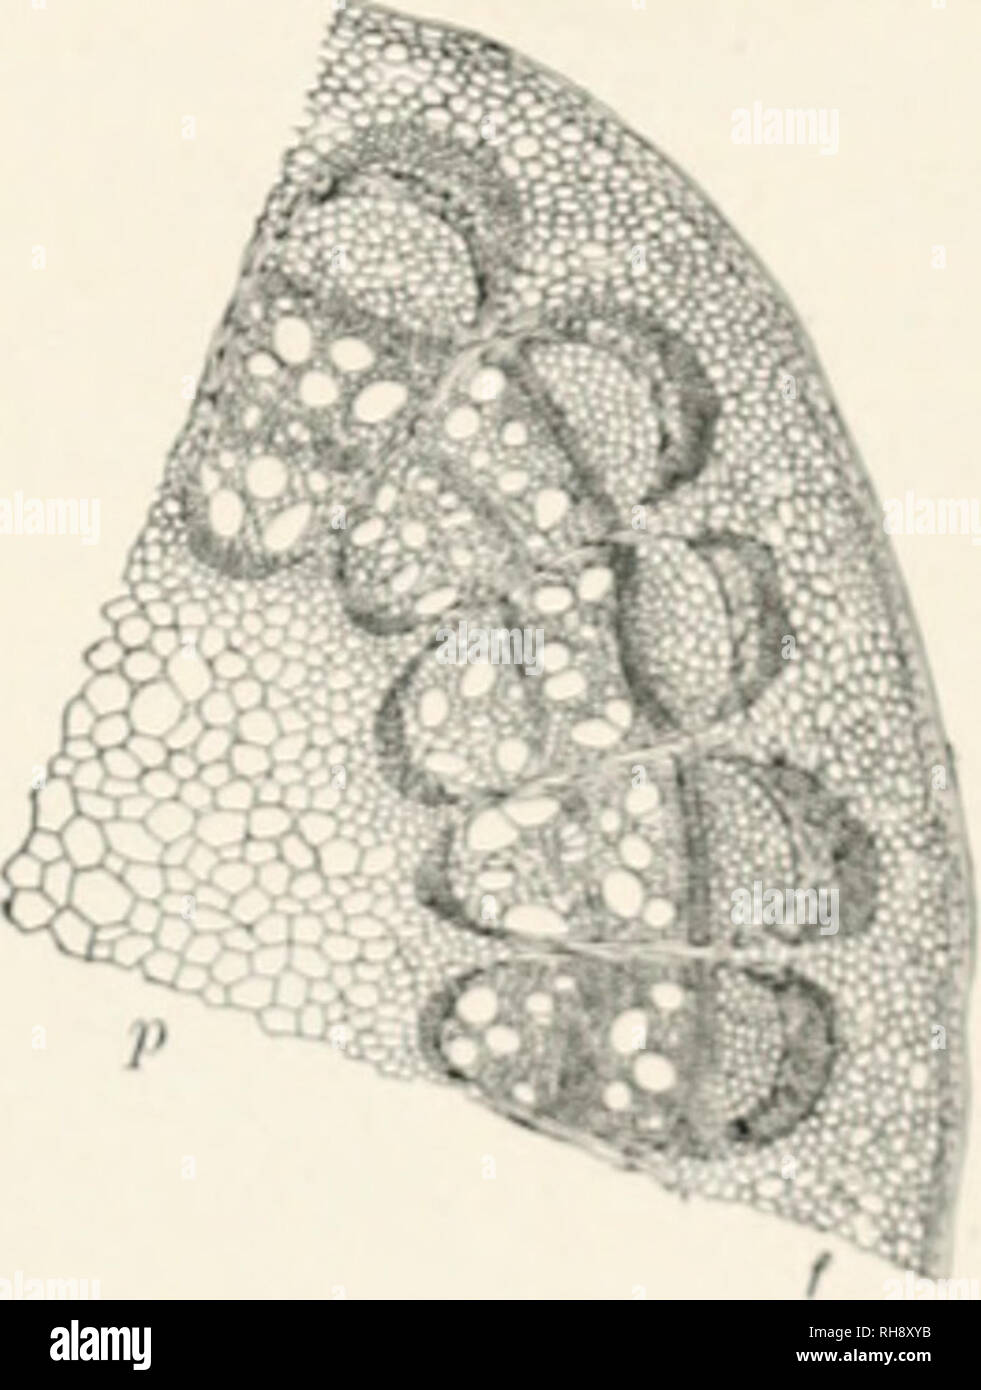 . Botany, an elementary text for schools. Botany. OTHER STEMSâTHREE TYPES OF i;TI)I,ES IN;!. one year old. Stain with hematoxylin. Make a iit'nnant'iit mount. Study with low power, and make a sketeli show- ing the shape and location of the fibro-vascular bundles. Fig. 402. Save the mount for further study. If meni- spermum stems are not easily ob- tained, ivy (Hedera helix) or clem- atis may be substituti'd. 428. OTHER STEMS.âliesides the two types of stems studied above, wliii-h ;ii-&lt;' prevalent among ])heno- gams, there are other stru ahvady bi-cu saifl (41S) that ever- iiliro-asculai- Stock Photo